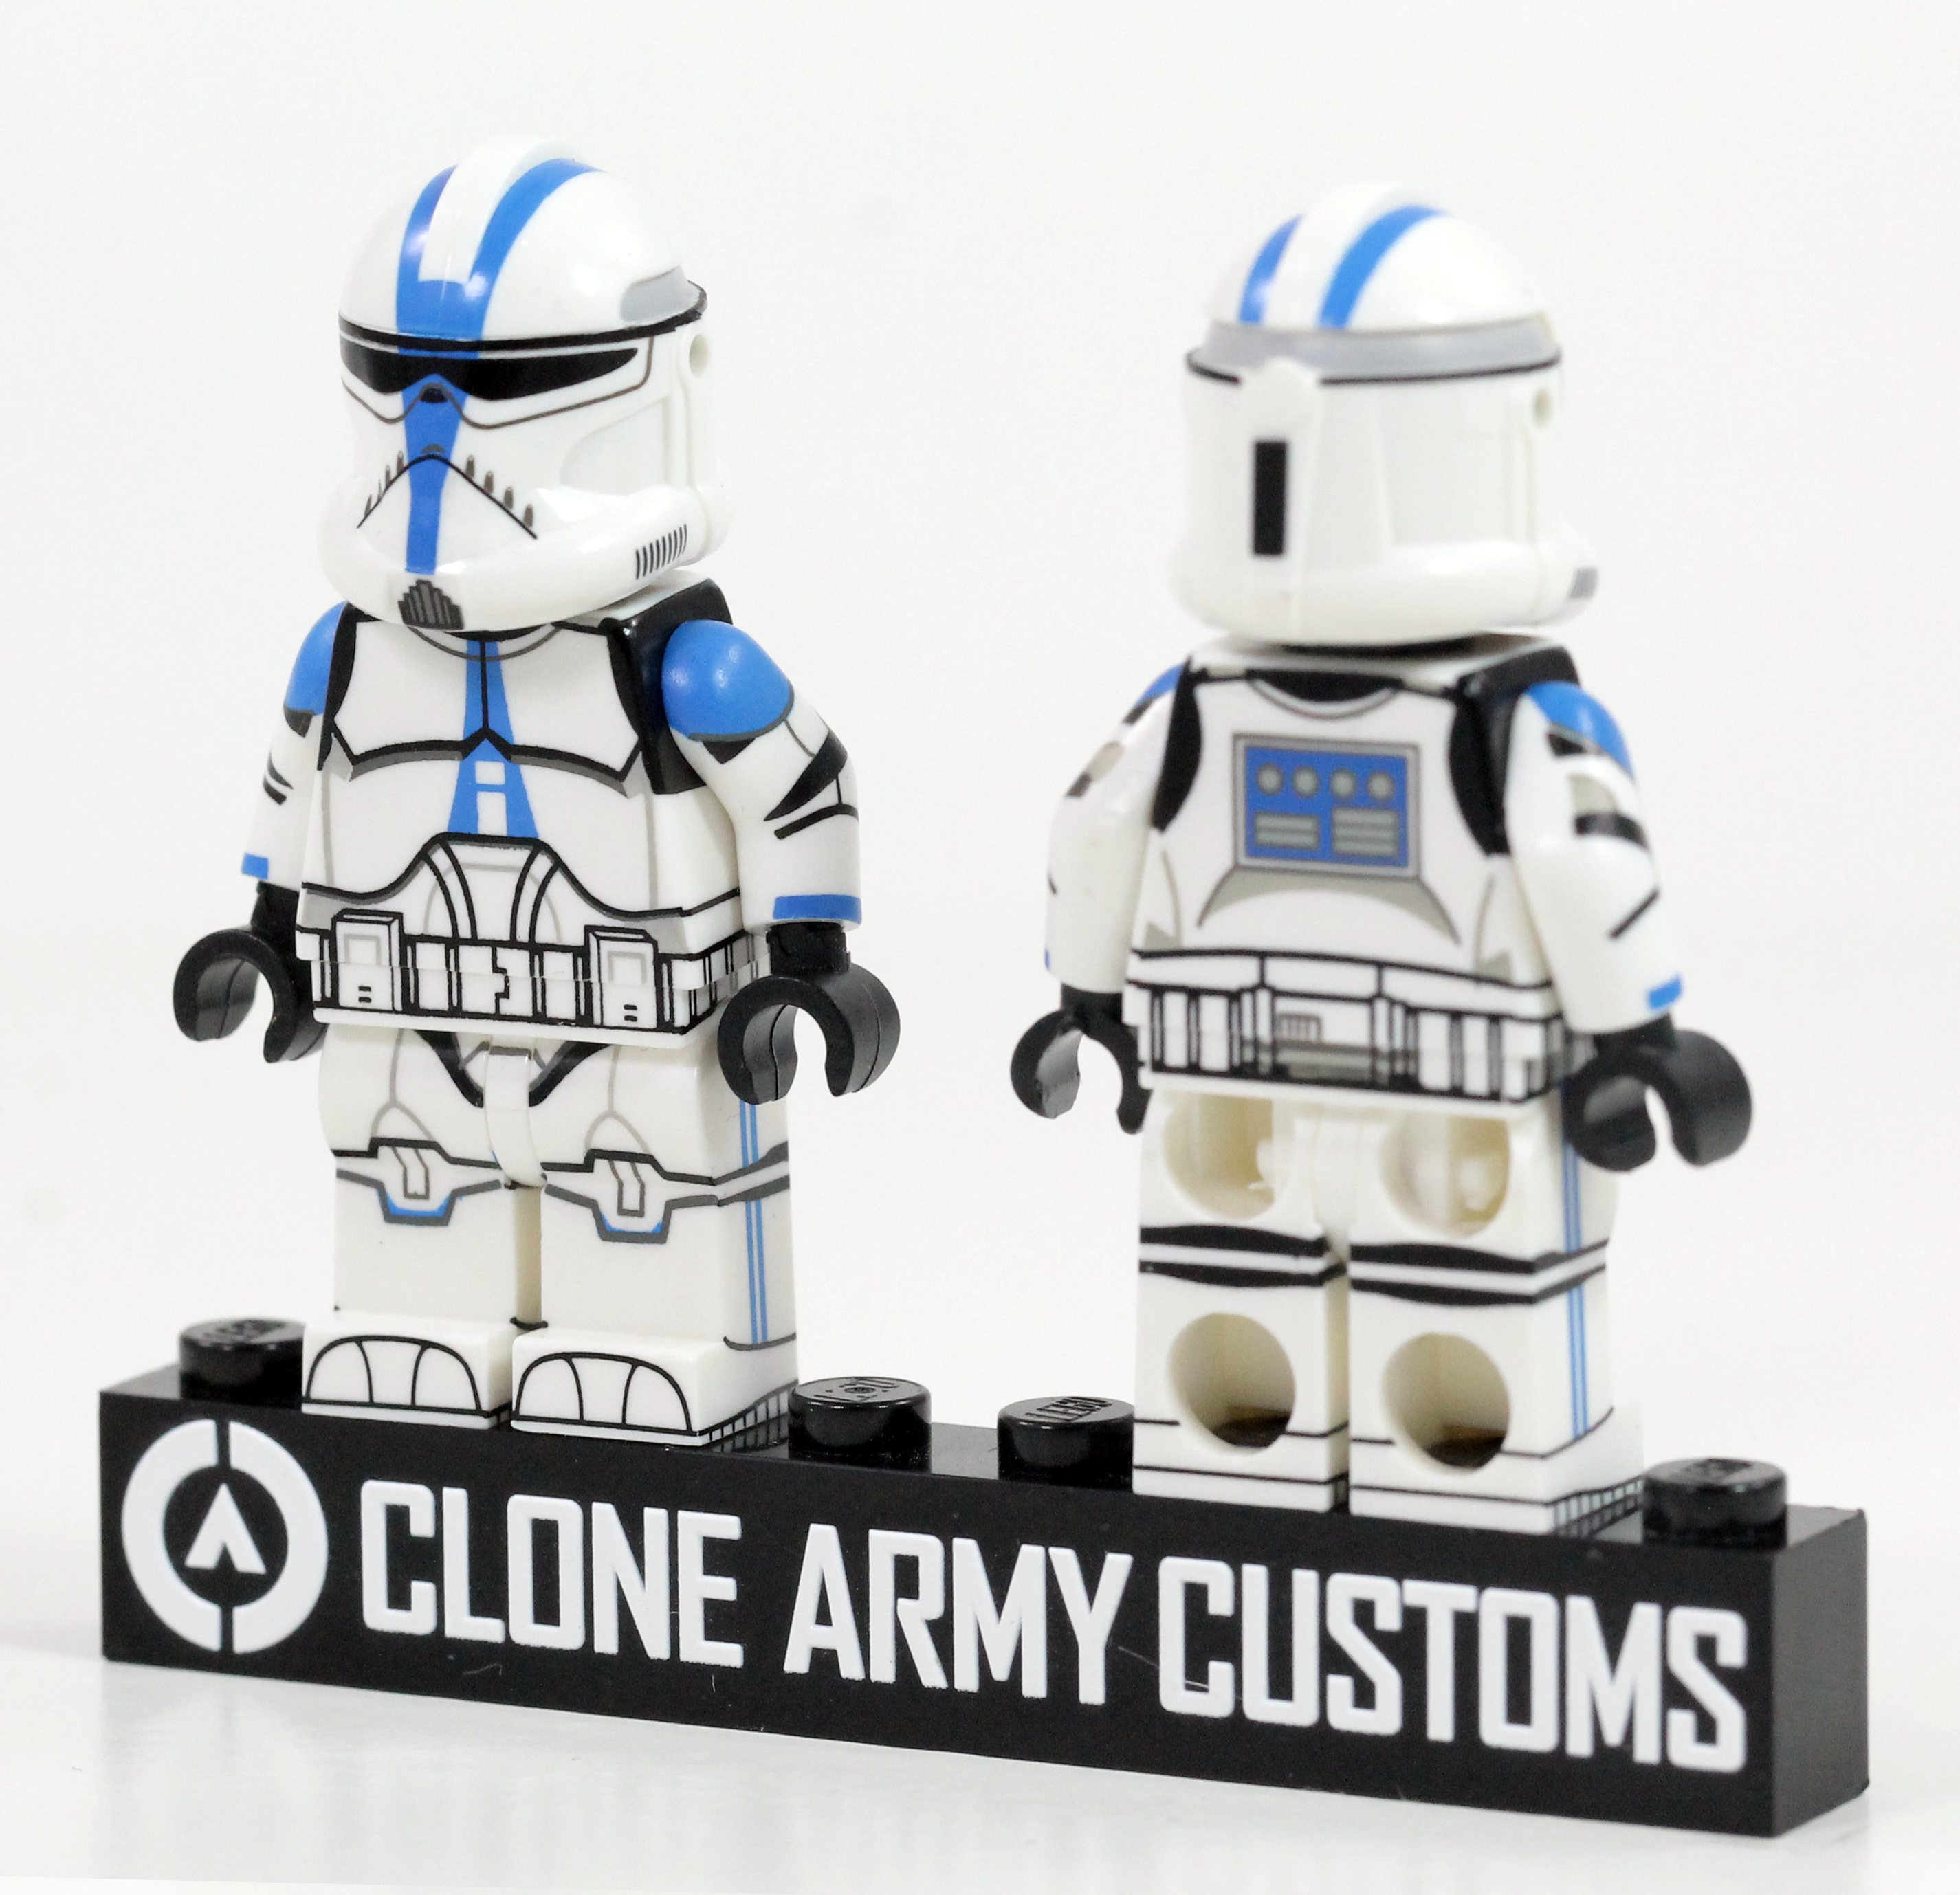 501st Realistic Recon Trooper Star Wars Minifig - Clone Army Customs (CAC)